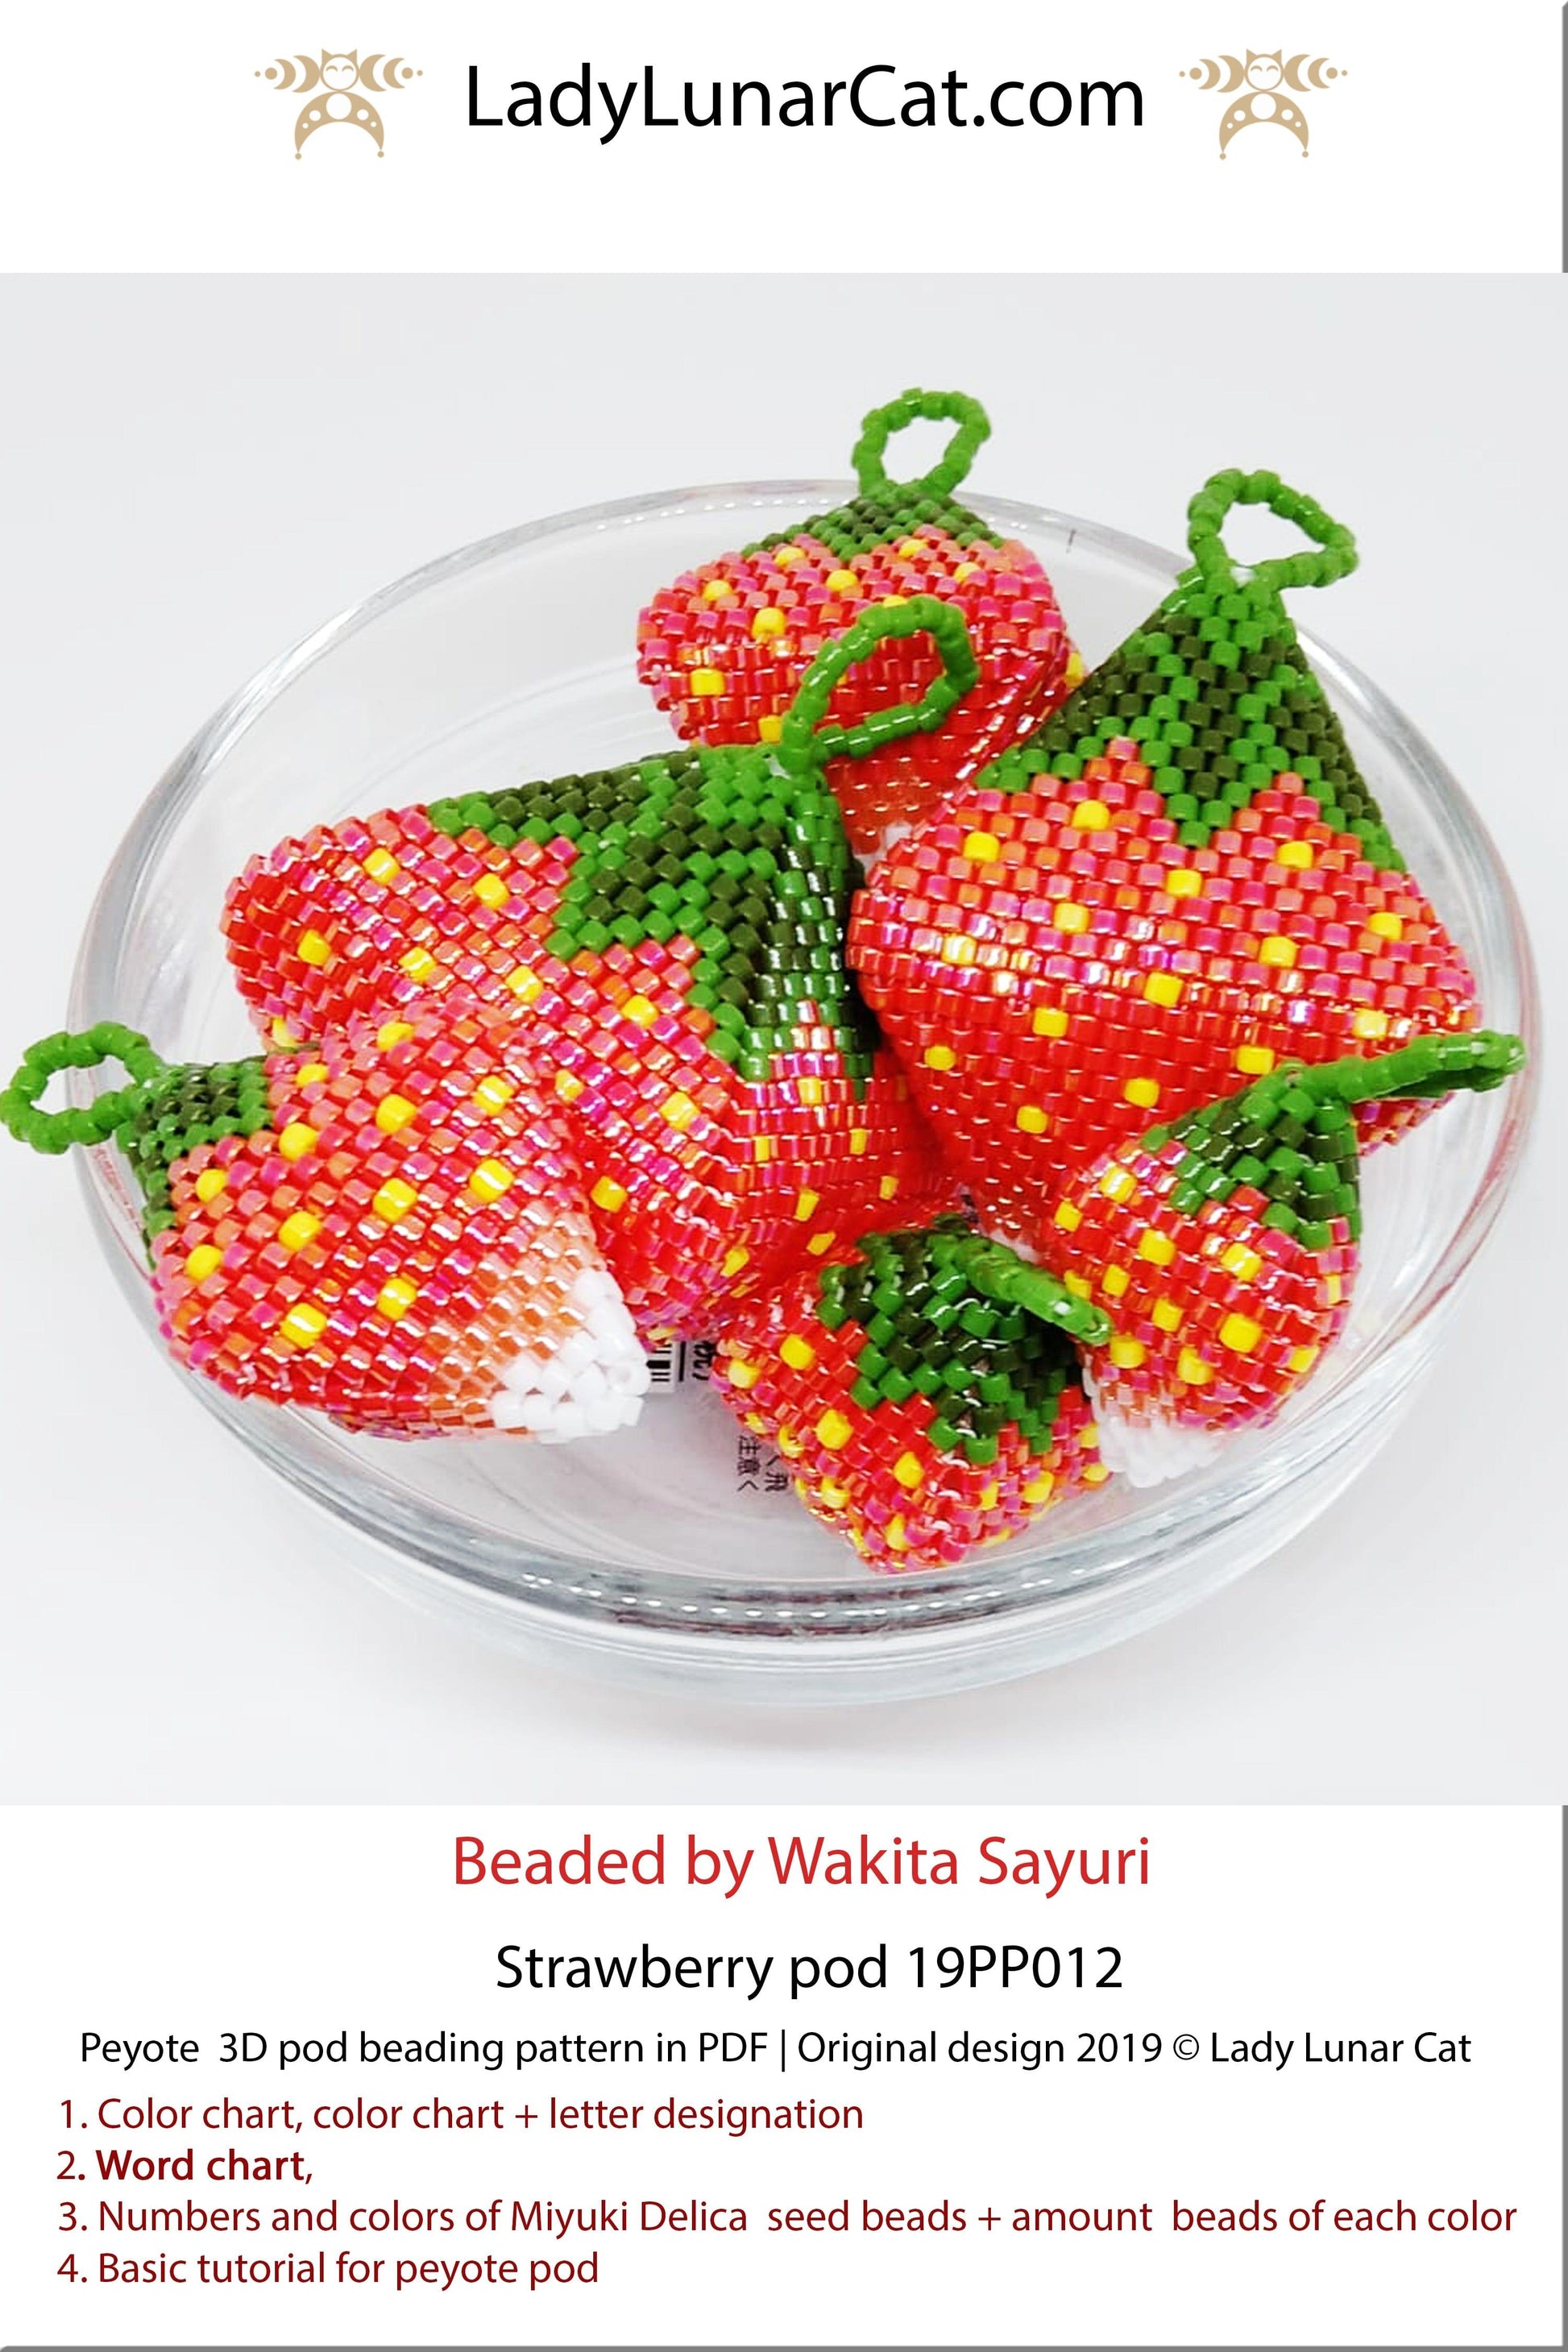 Beading pattern for 3d peyote pod Strawberry 19PP012 by Lady Lunar